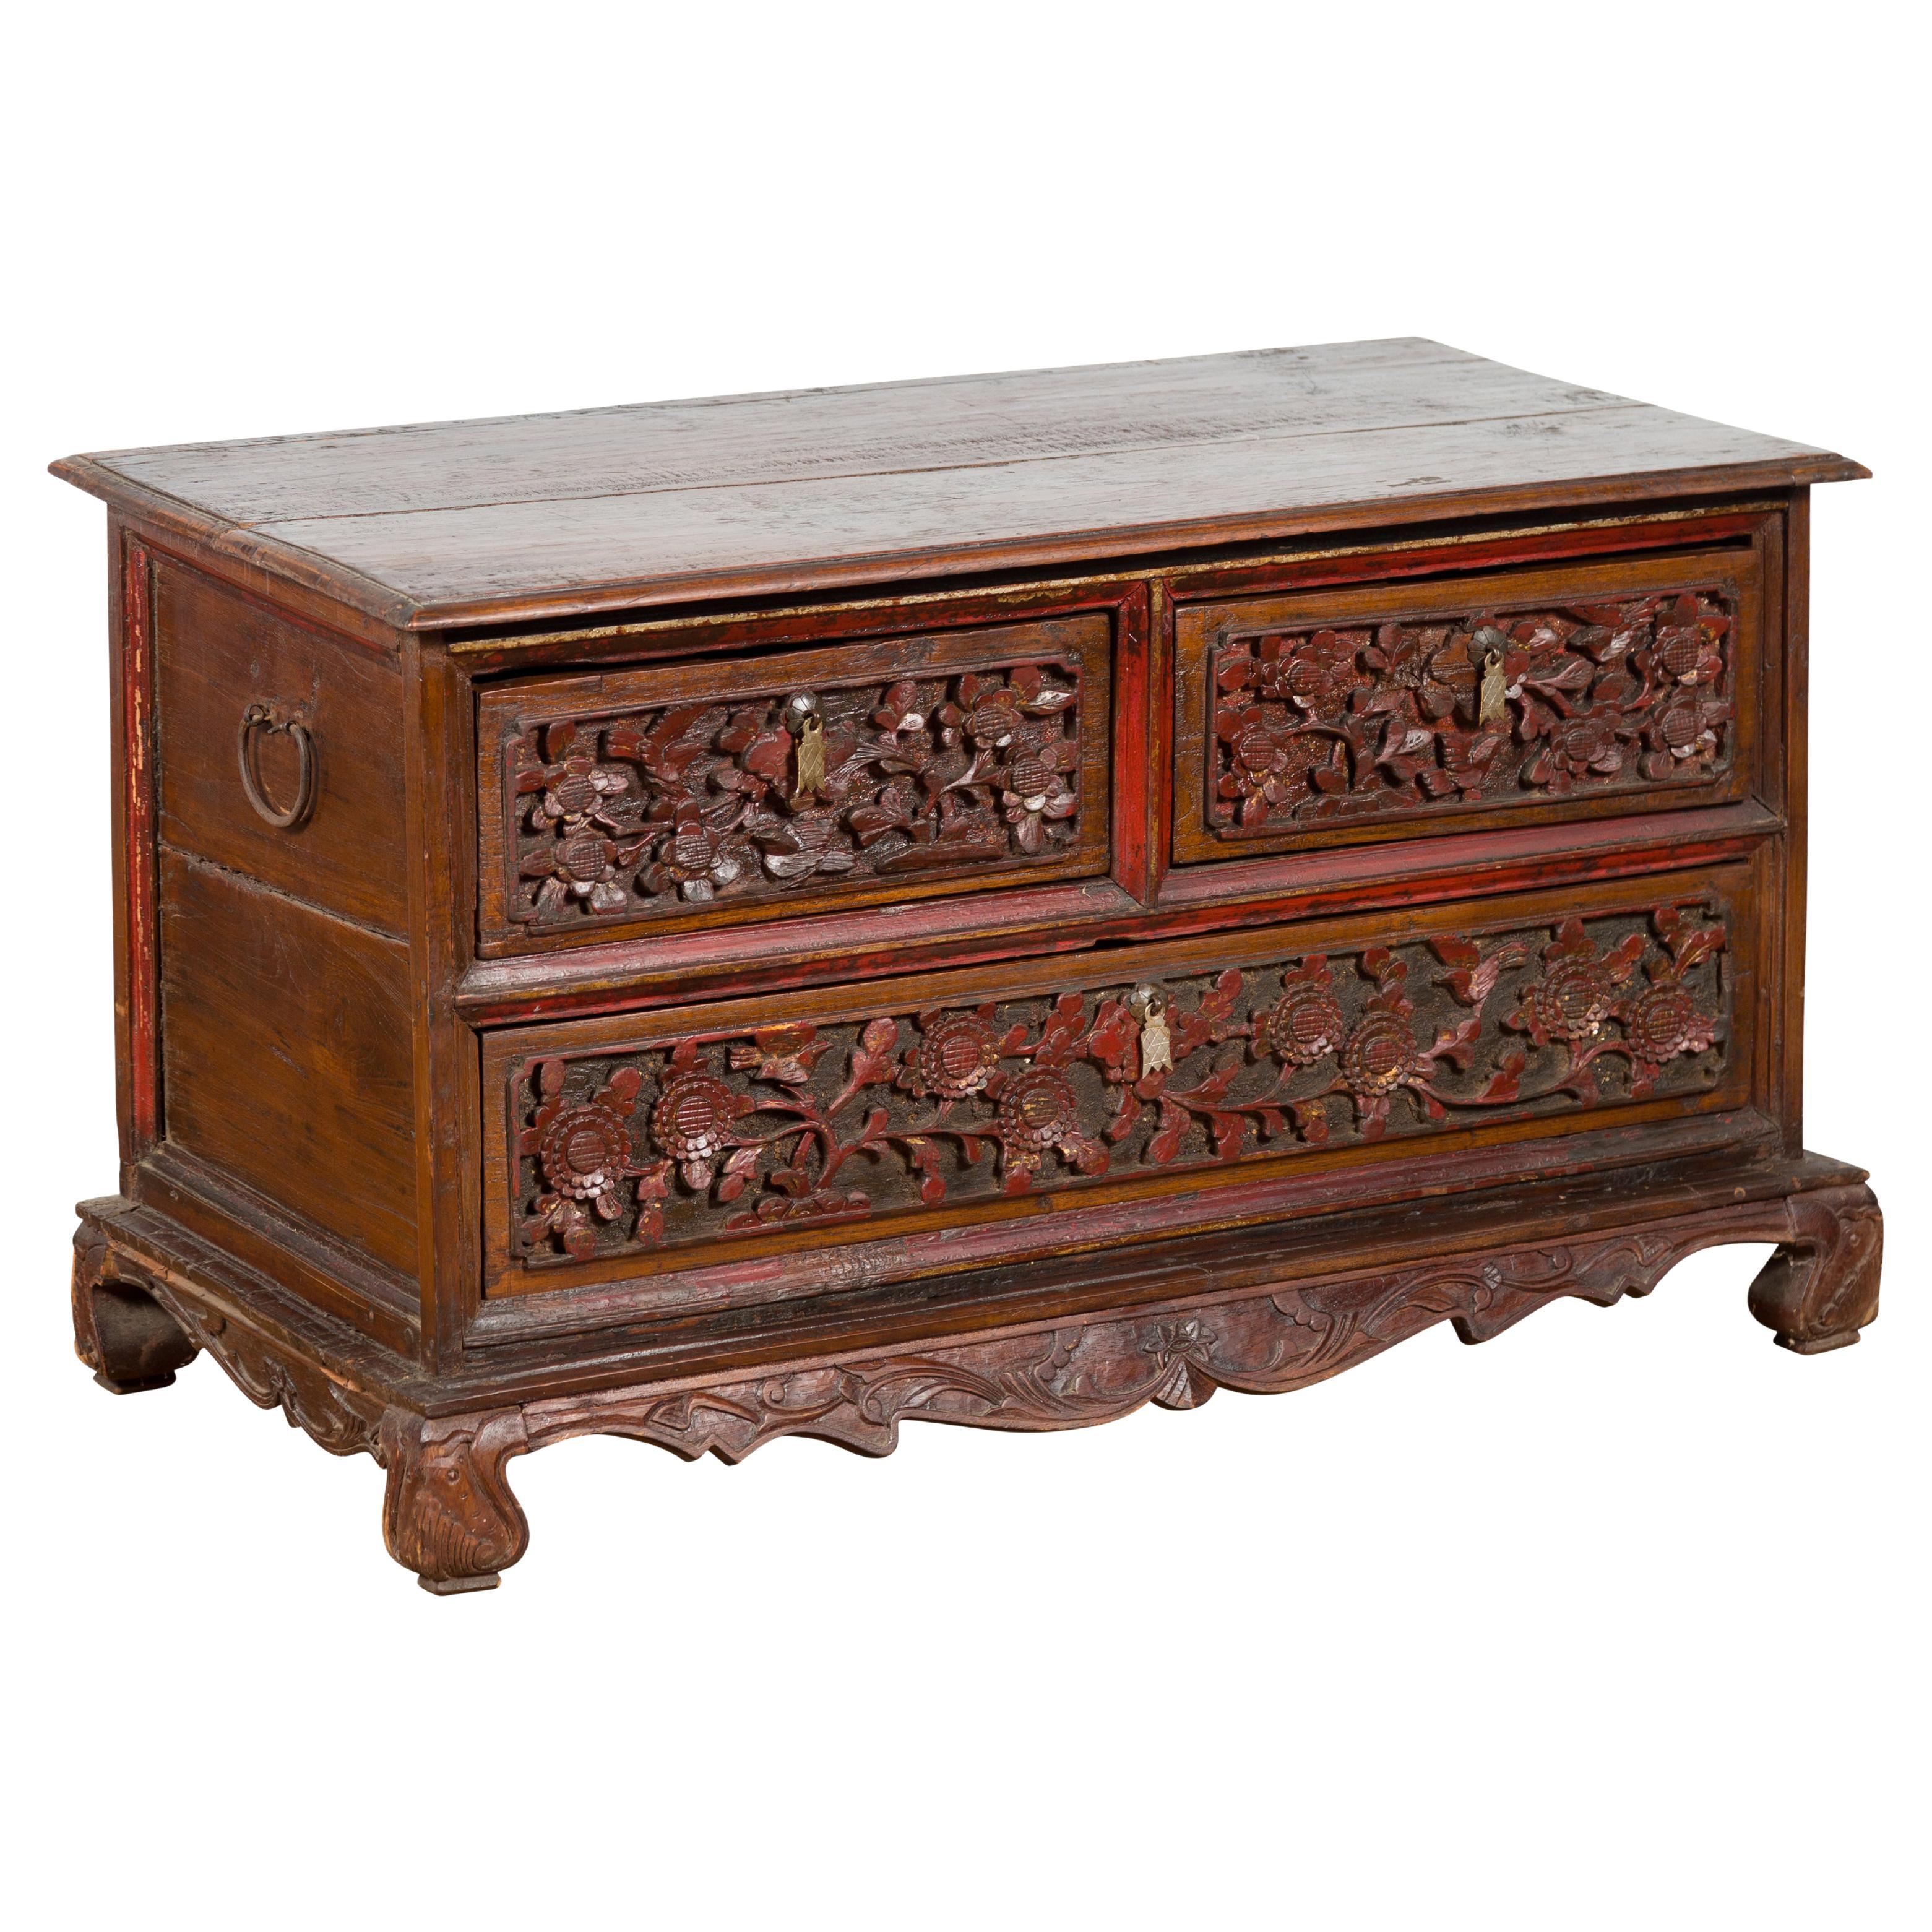 Early 20th Century Madurese Treasure Chest with Hand-Carved Floral Décor For Sale